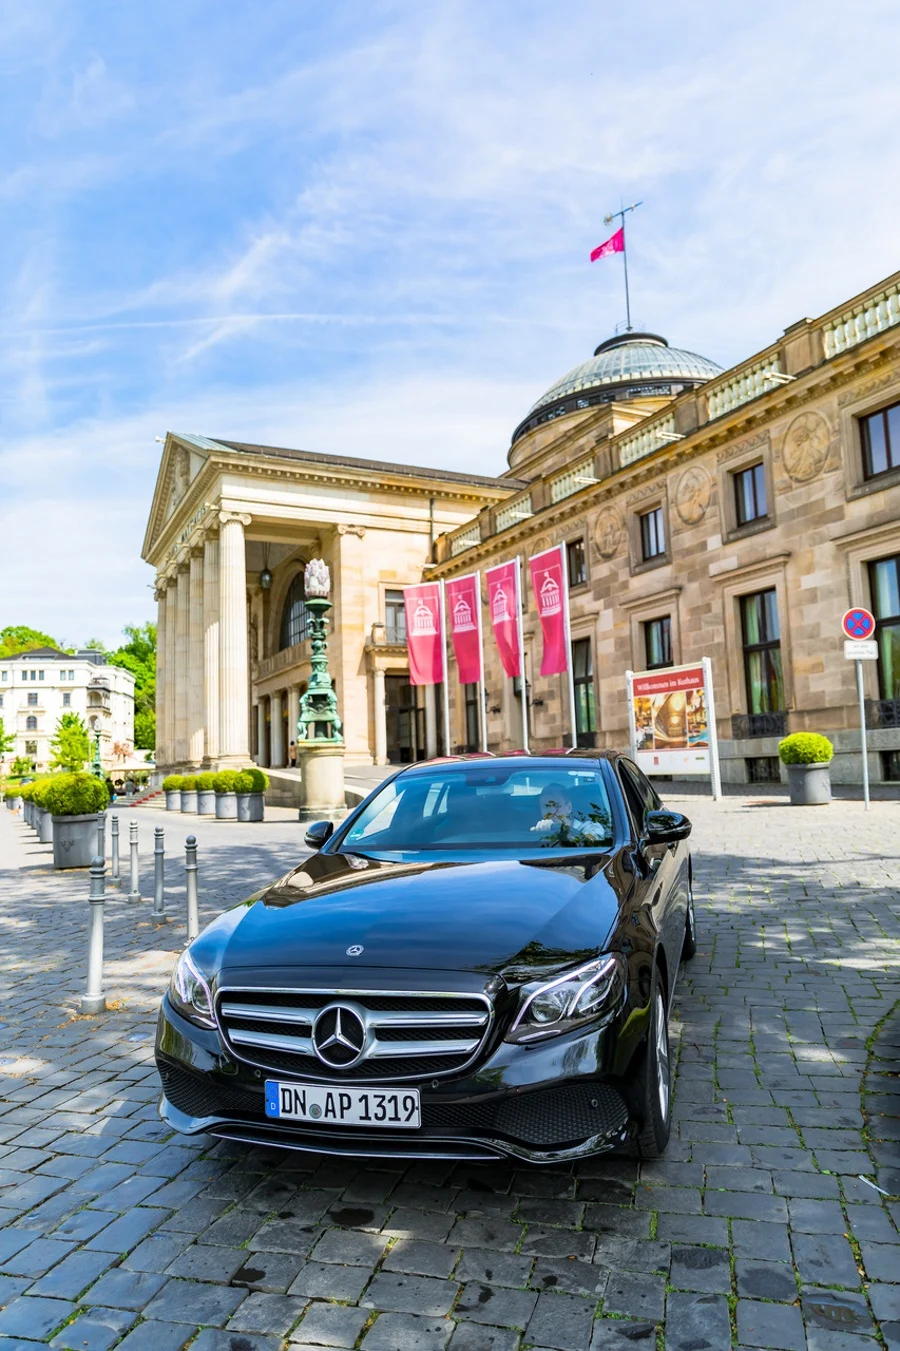 Why taking a road trip can be the best way to learn while traveling, as explained by travel blogger JQ Louise, who roadtripped through Germany's Frankfurt-Rhine-Main region. This European gem is full of food, castles and sight seeing, and JQ learned about Germany like a local. Pictured: The rental car at the Kurhaus in Wiesbaden.